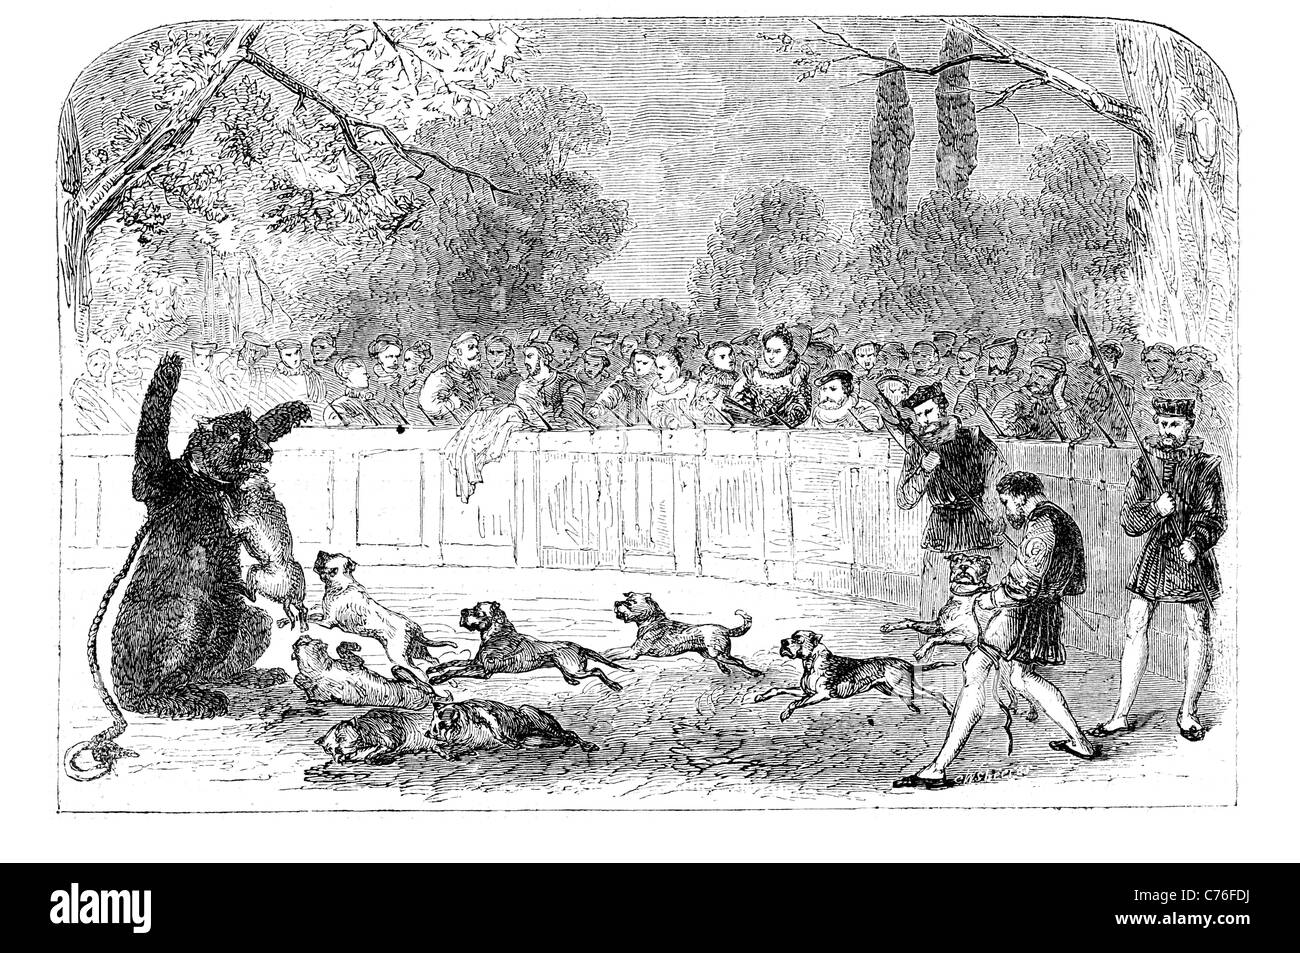 Bear baiting herds bears baiting gardens circular high fenced area pit  spectators chained leg neck trained hunting dogs wounded Stock Photo - Alamy